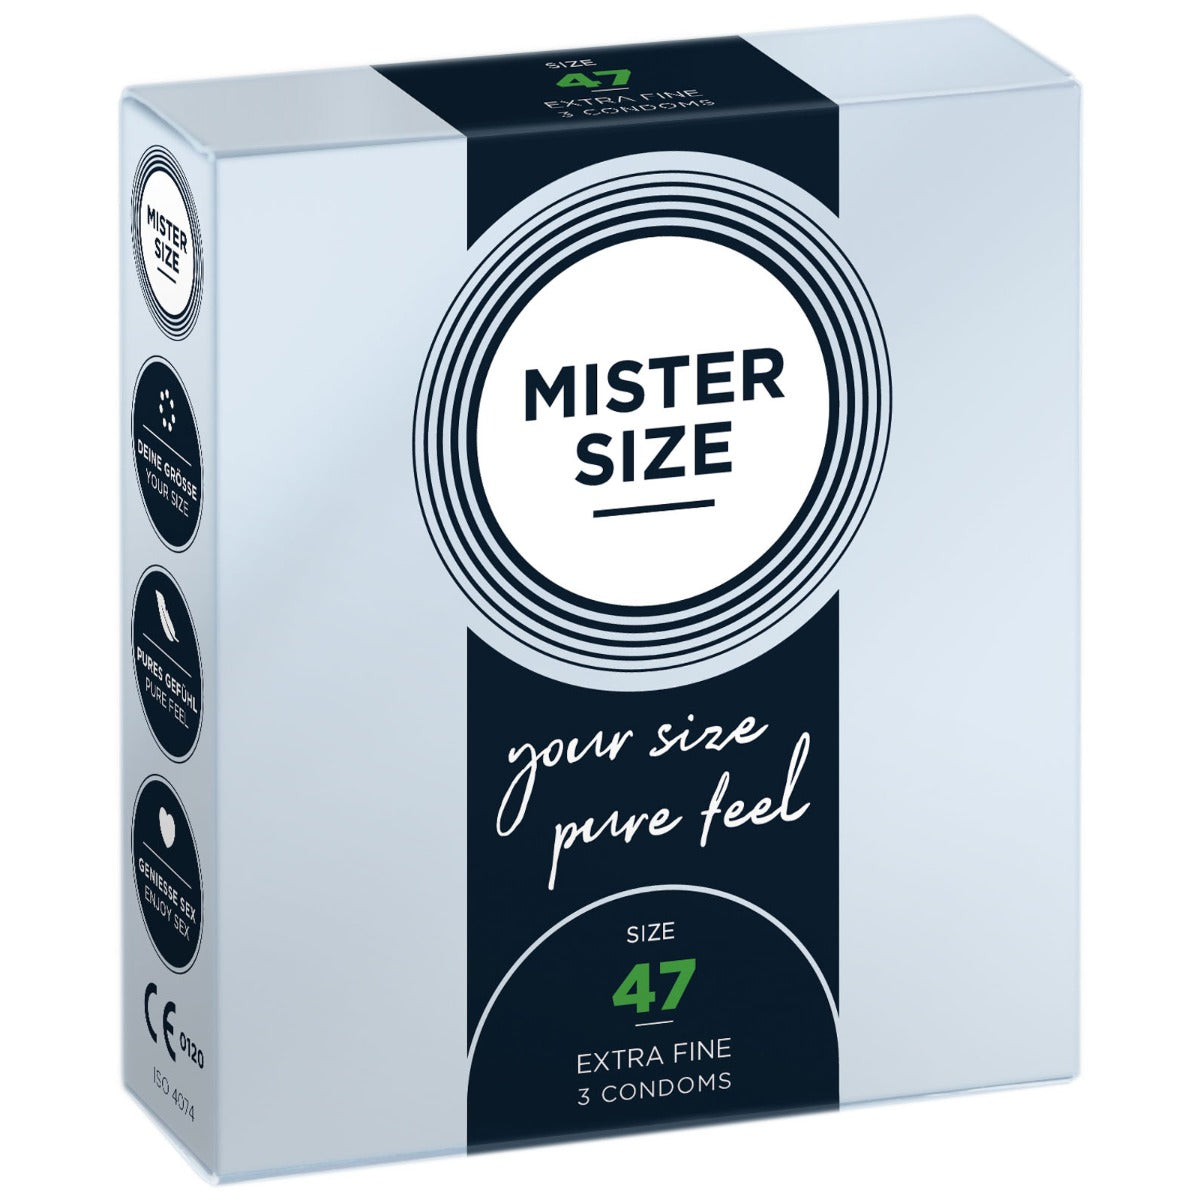 Condoms MISTER SIZE - pure feel Condoms - size 47 mm (3 pack)   